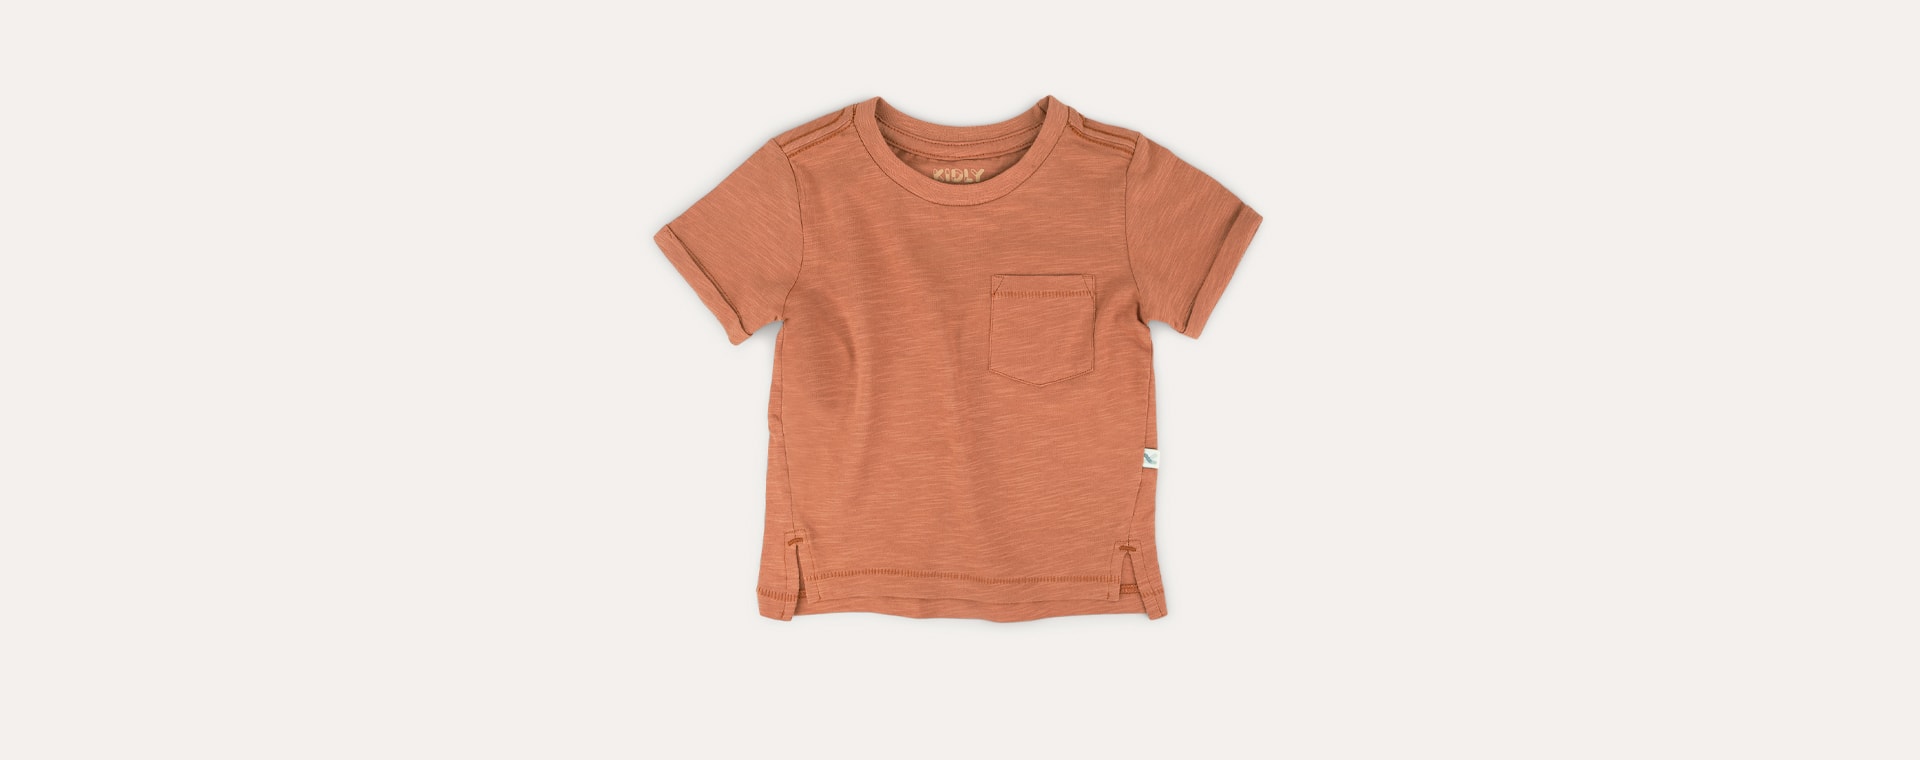 Terracotta KIDLY Label Perfect Tee